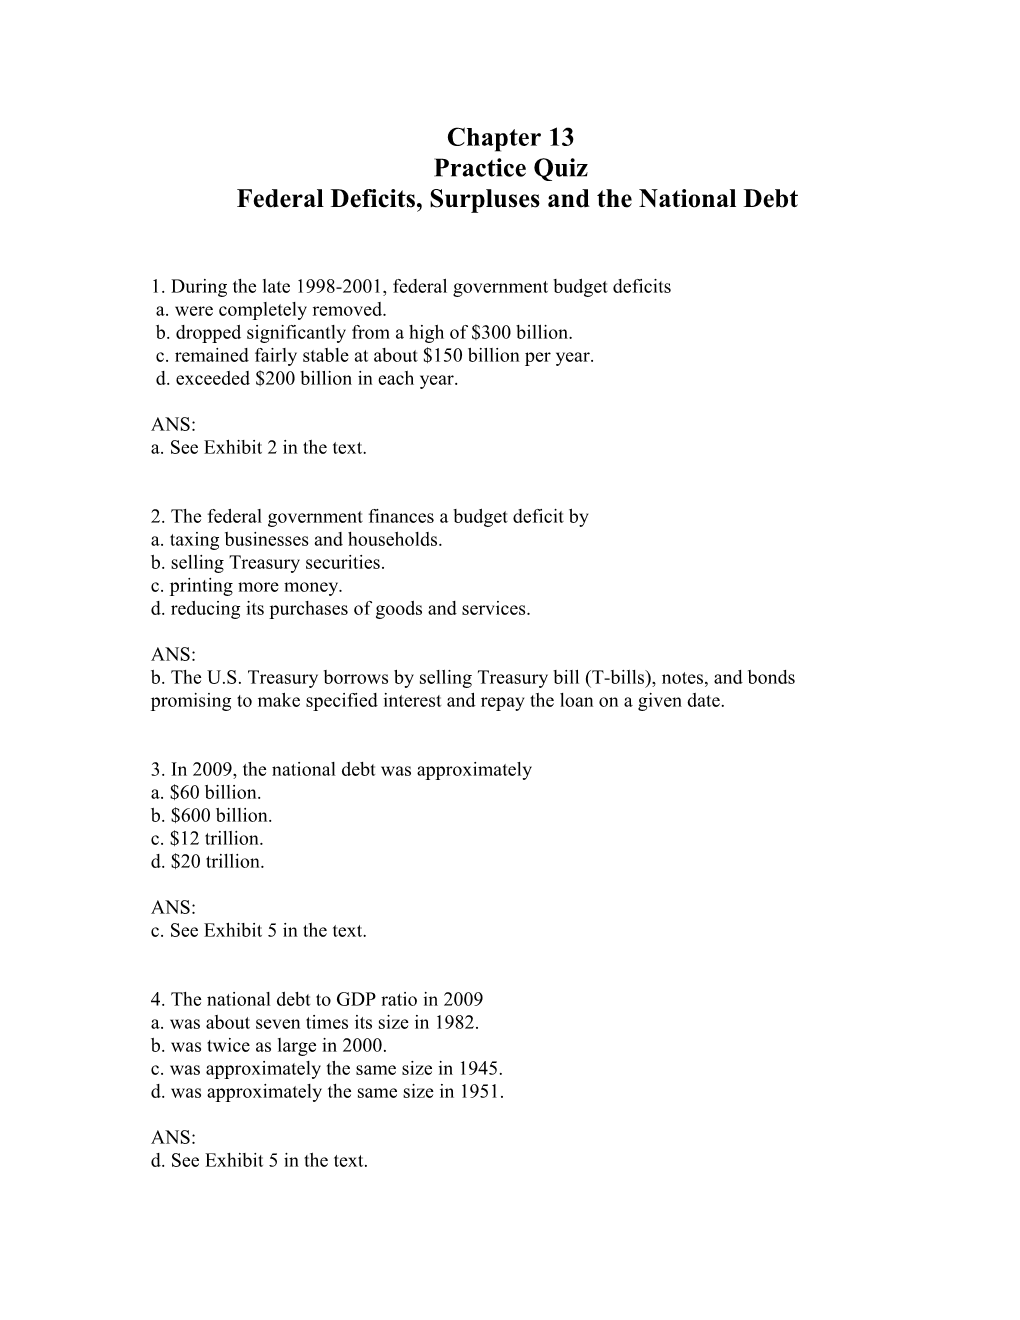 1. During the Late 1998-2001, Federal Government Budget Deficits